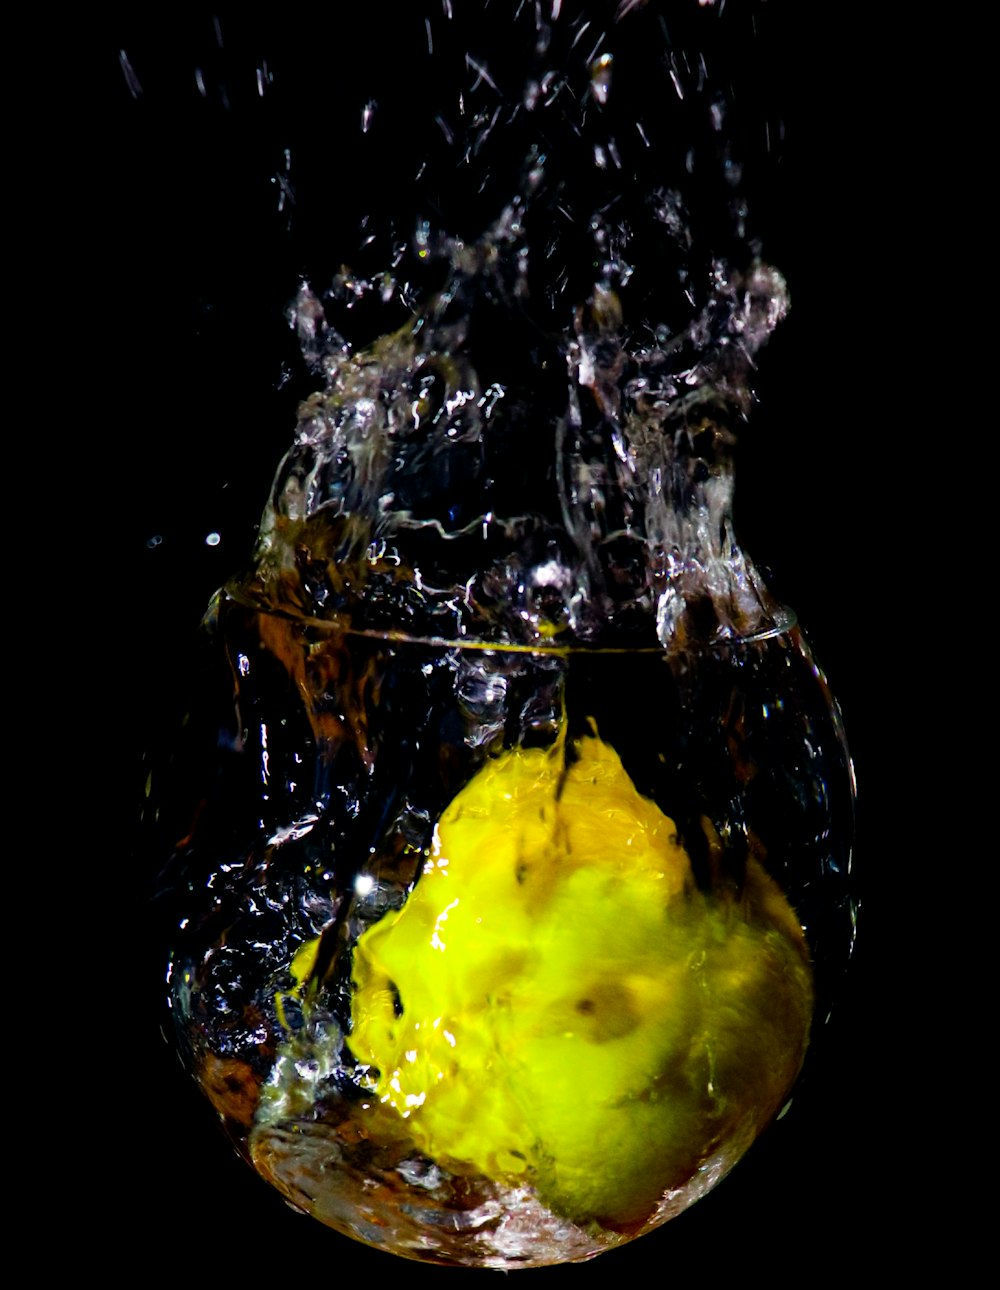 yellow fruit in water with water droplets